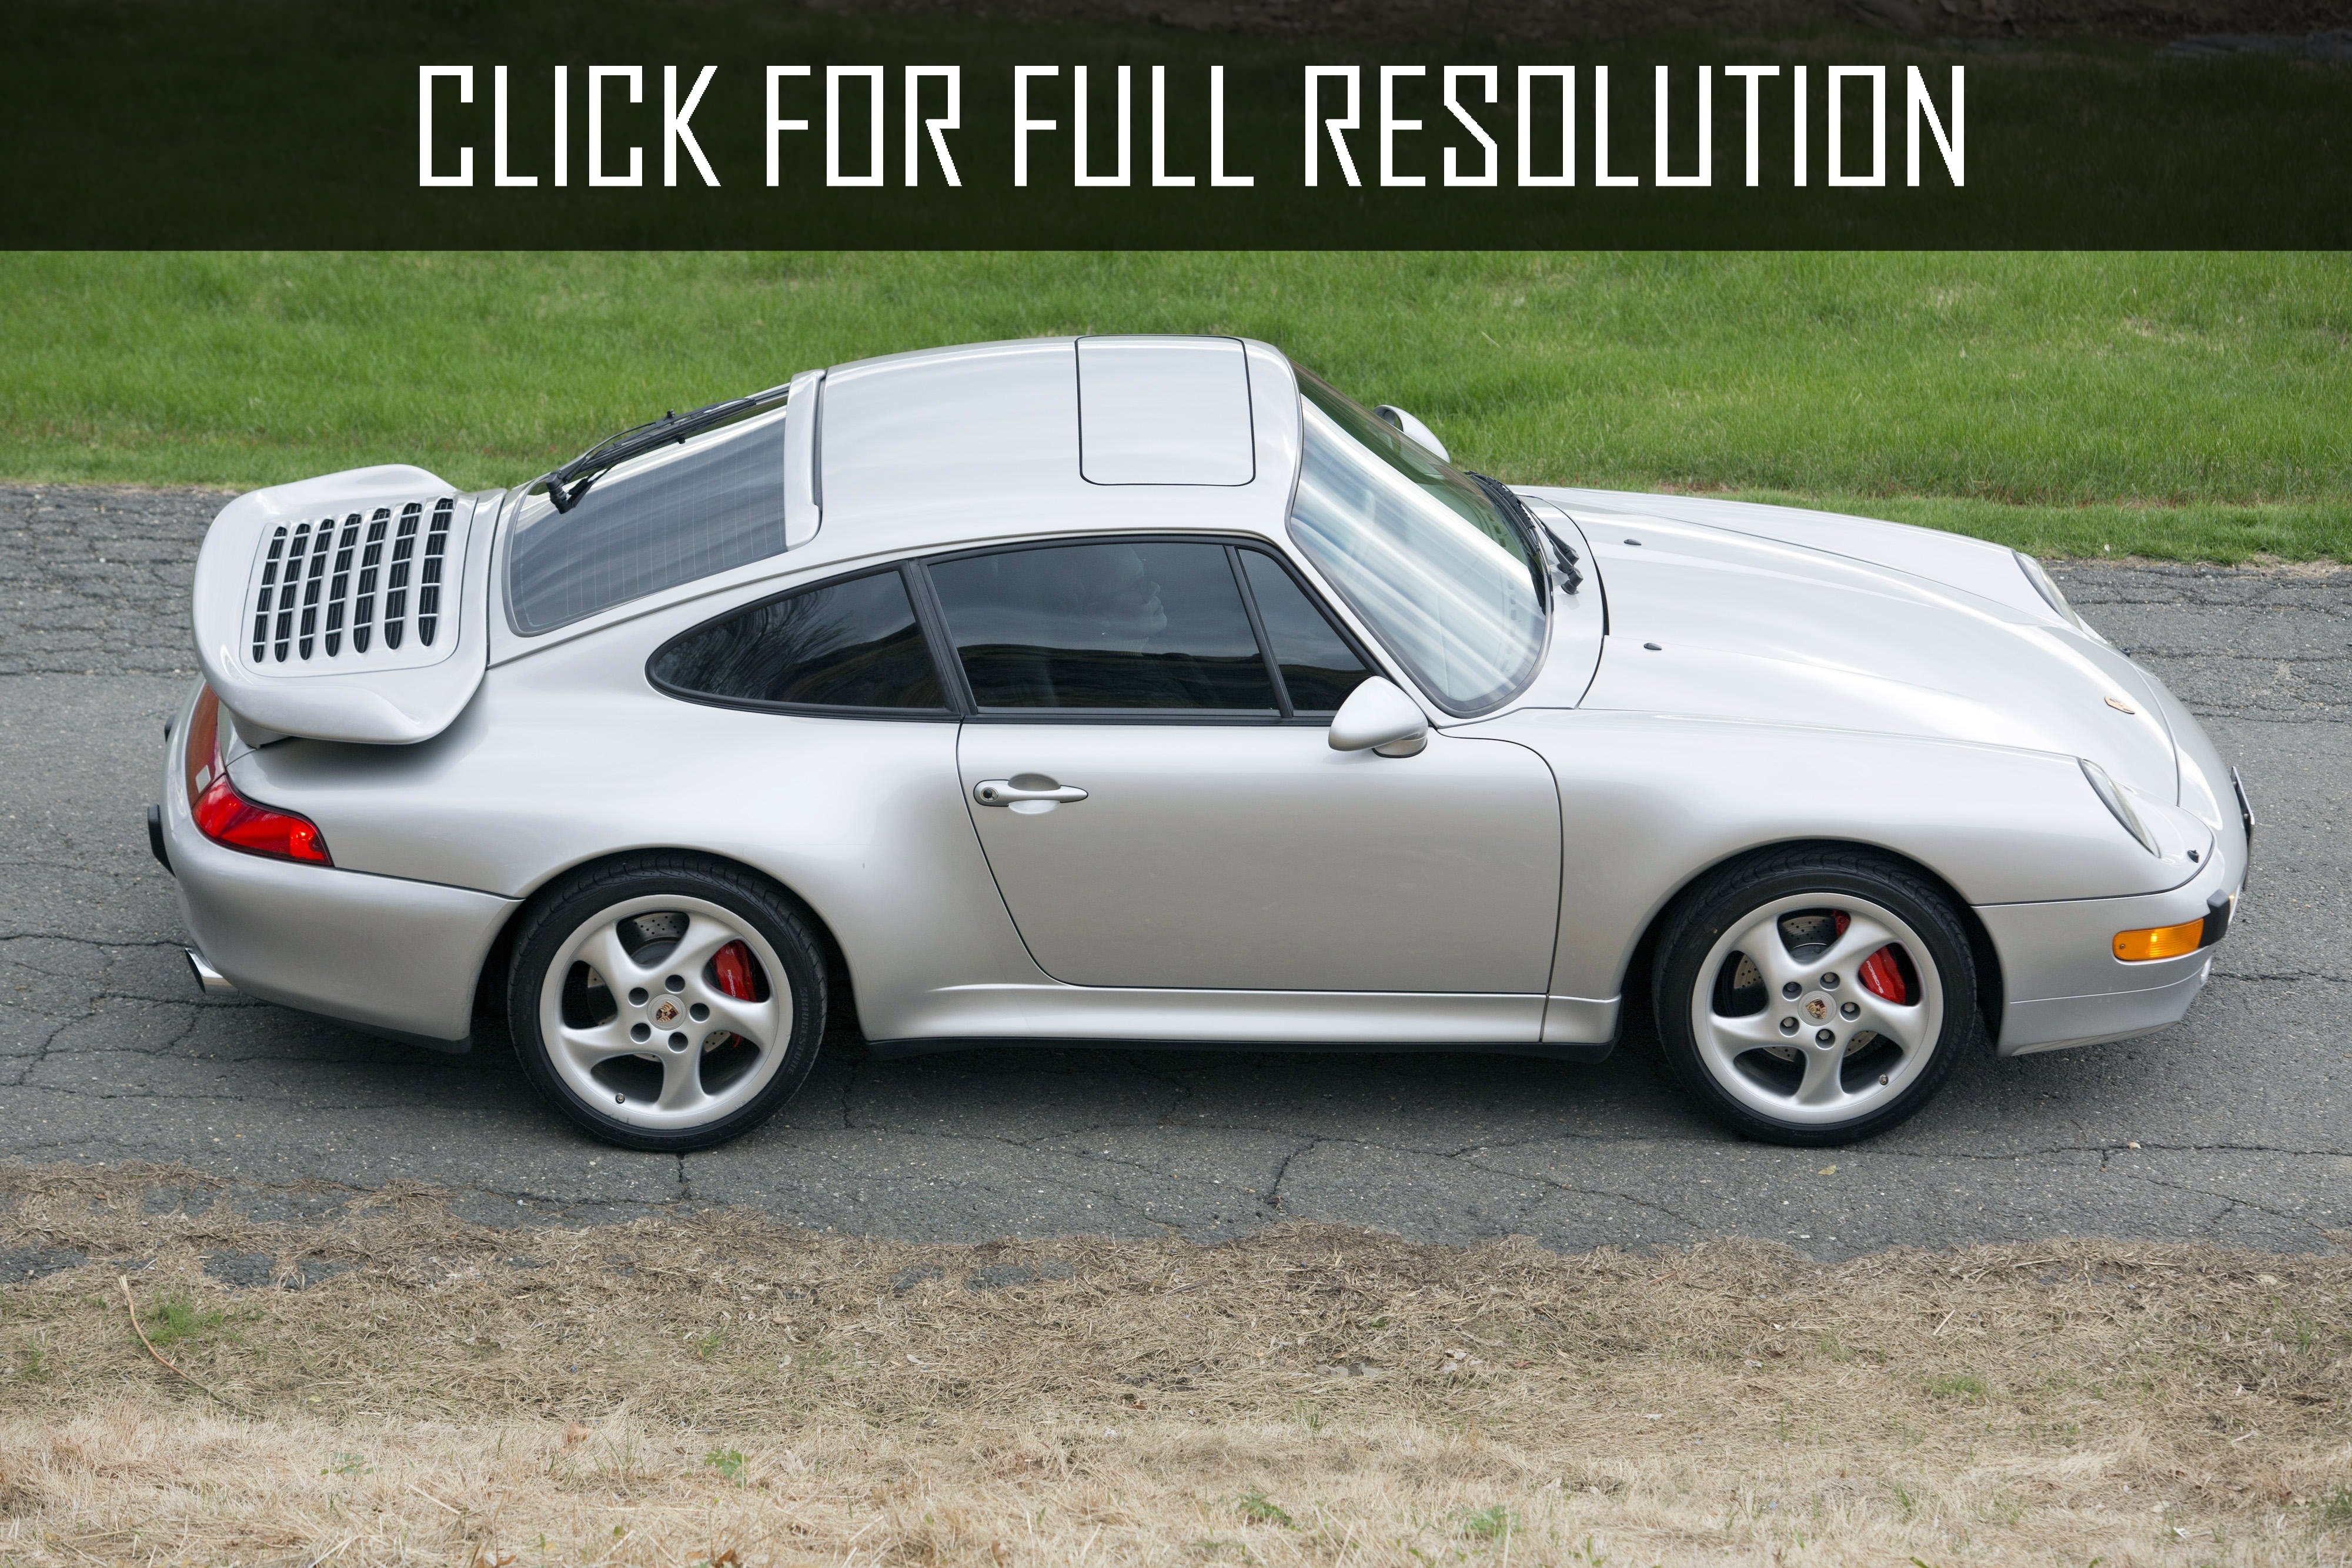 1995 Porsche 911 Turbo news, reviews, msrp, ratings with